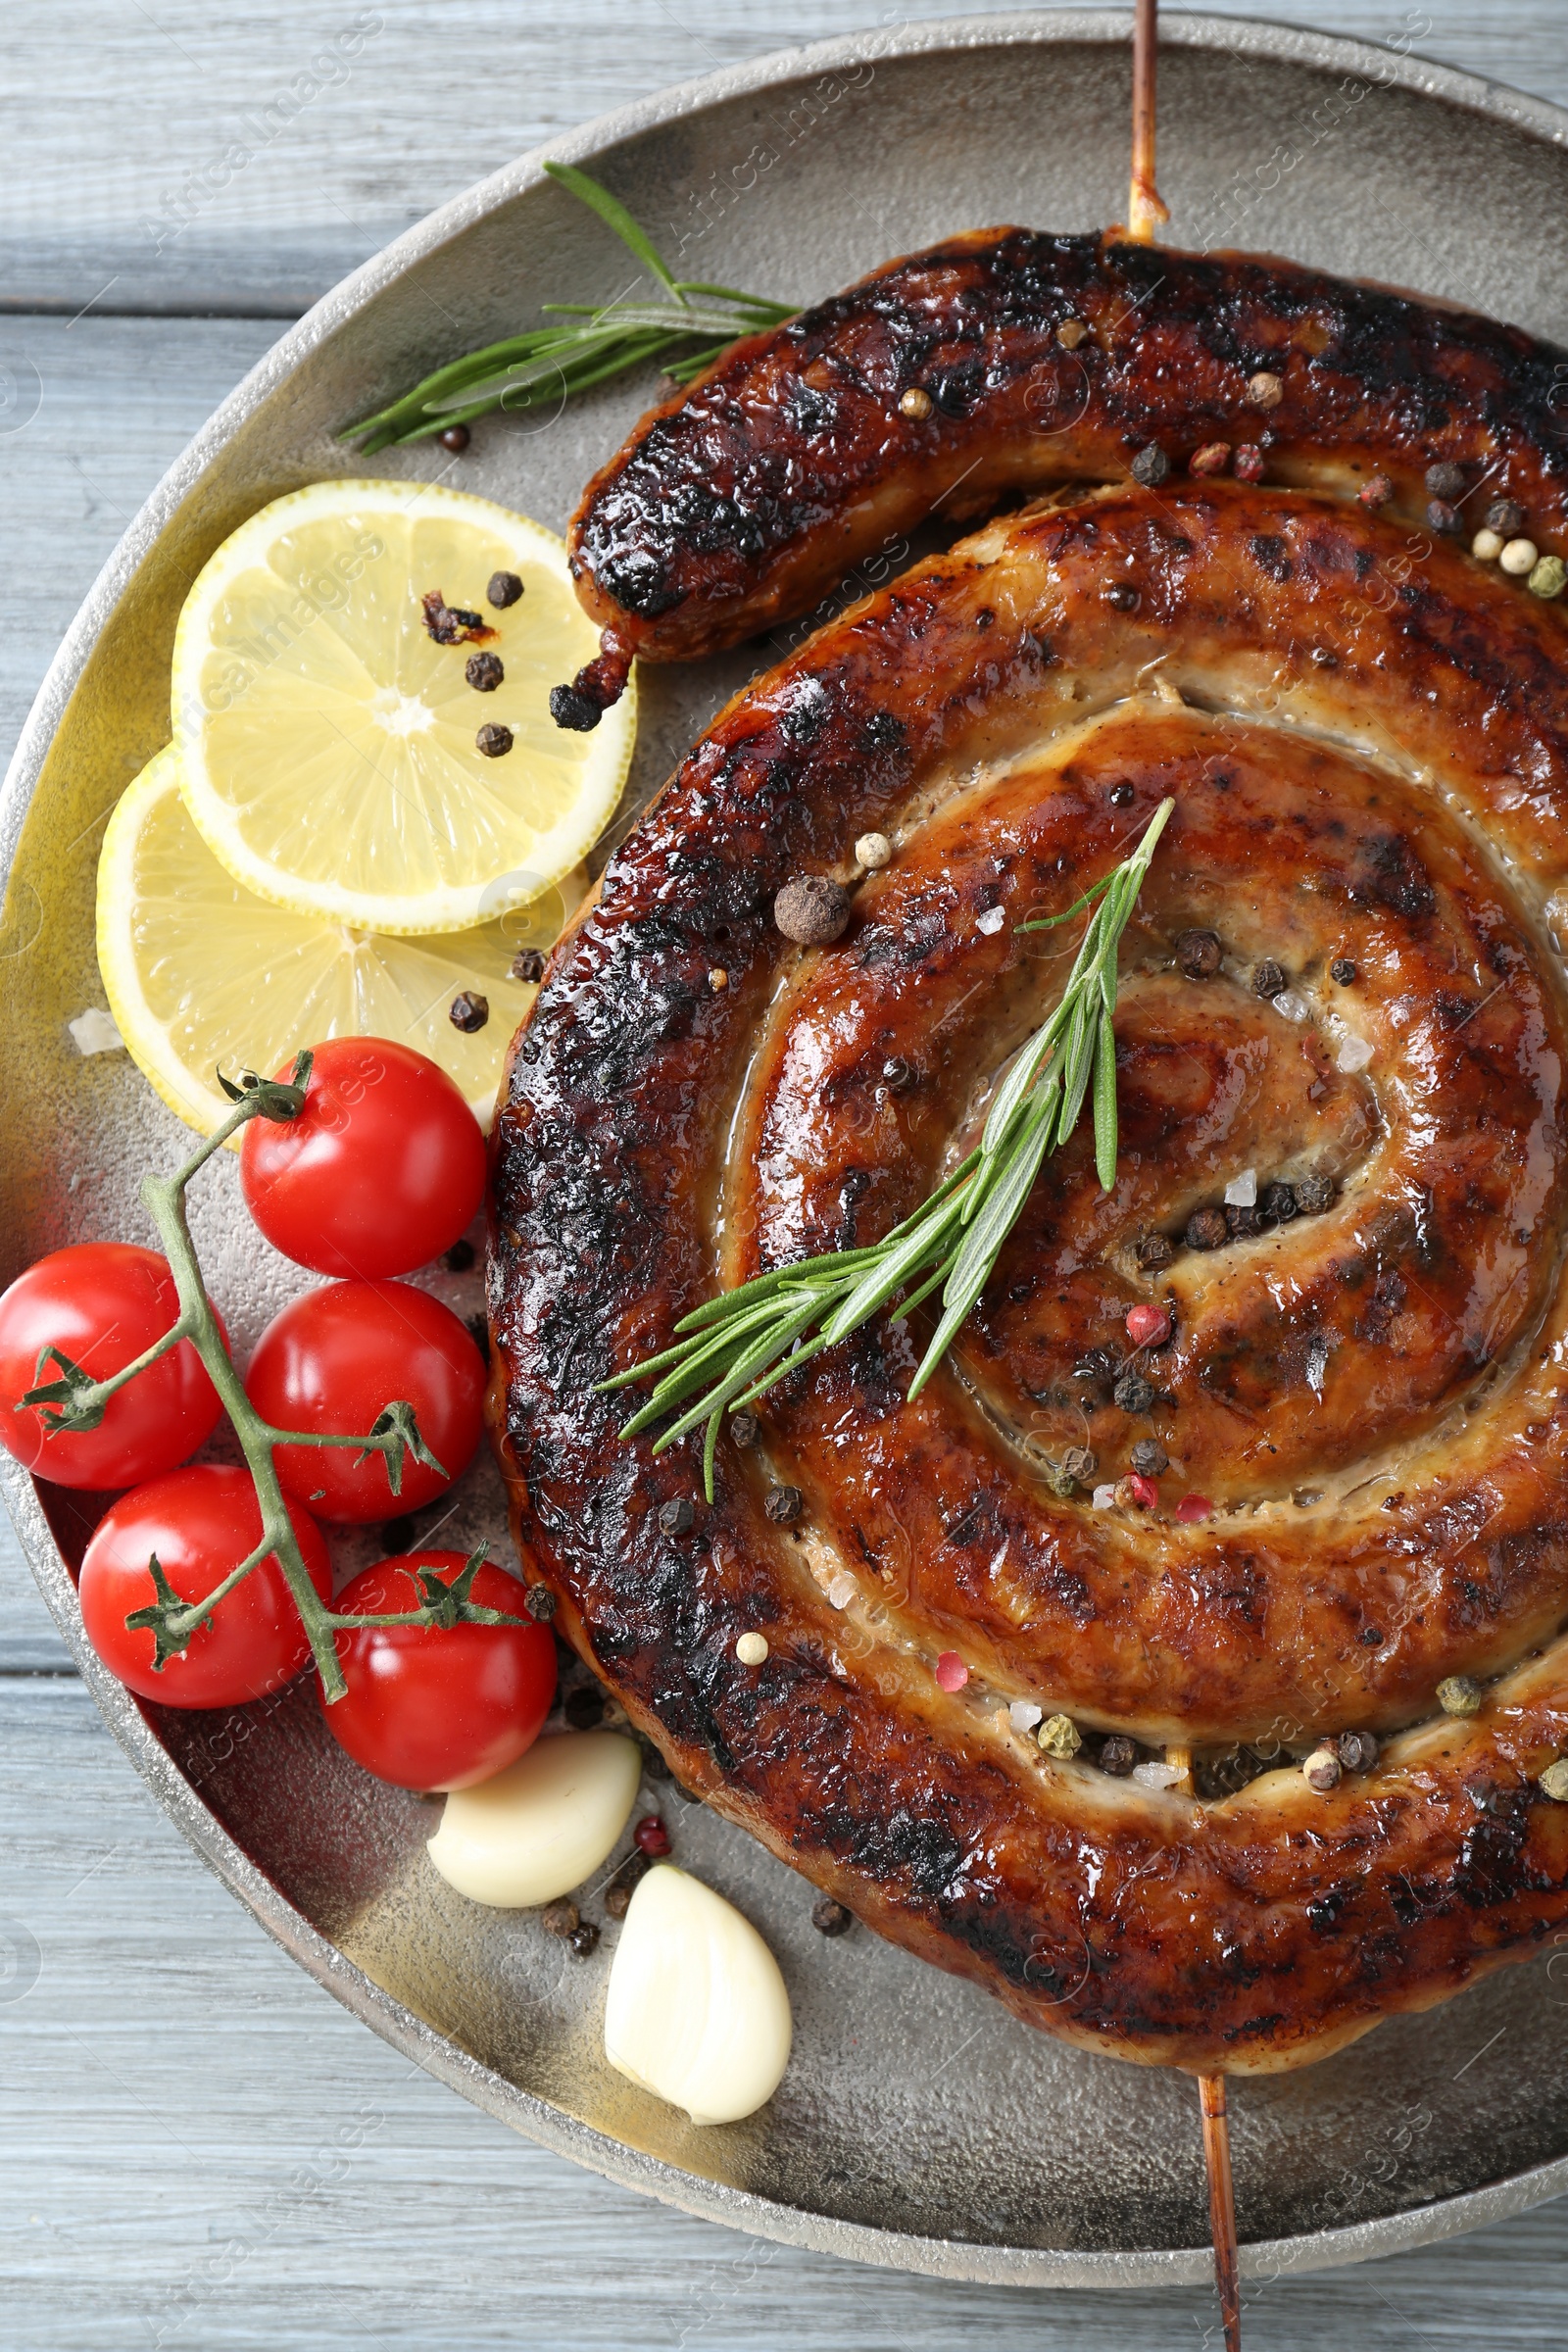 Photo of Delicious homemade sausage with spices, tomatoes and lemon on light grey wooden table, top view